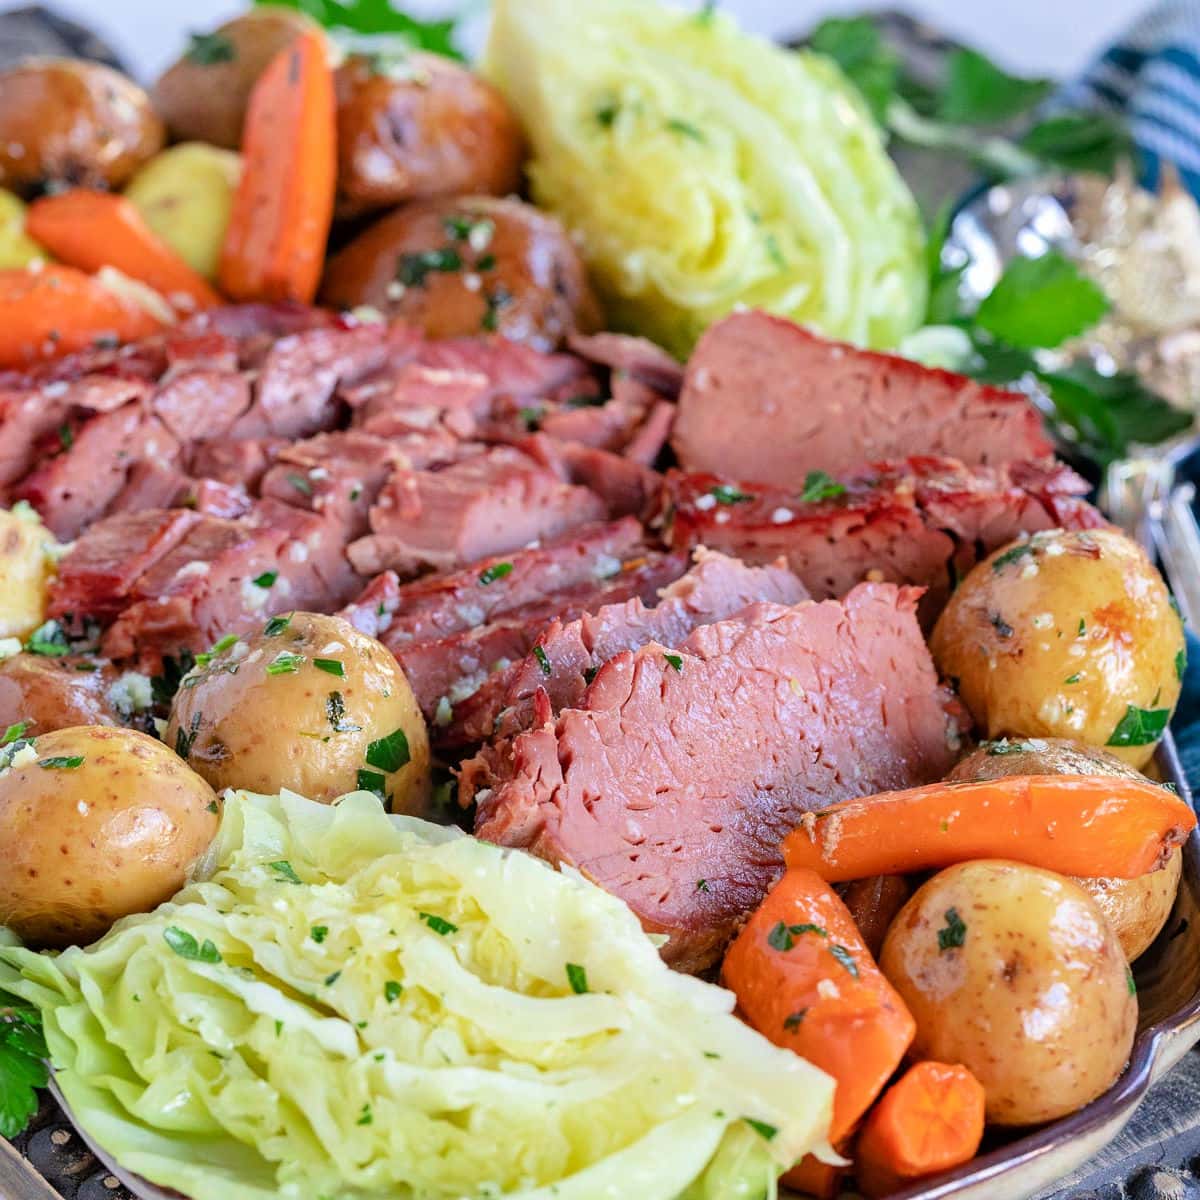 https://www.momontimeout.com/wp-content/uploads/2022/03/corned-beef-and-cabbage-slow-cooker-square.jpeg